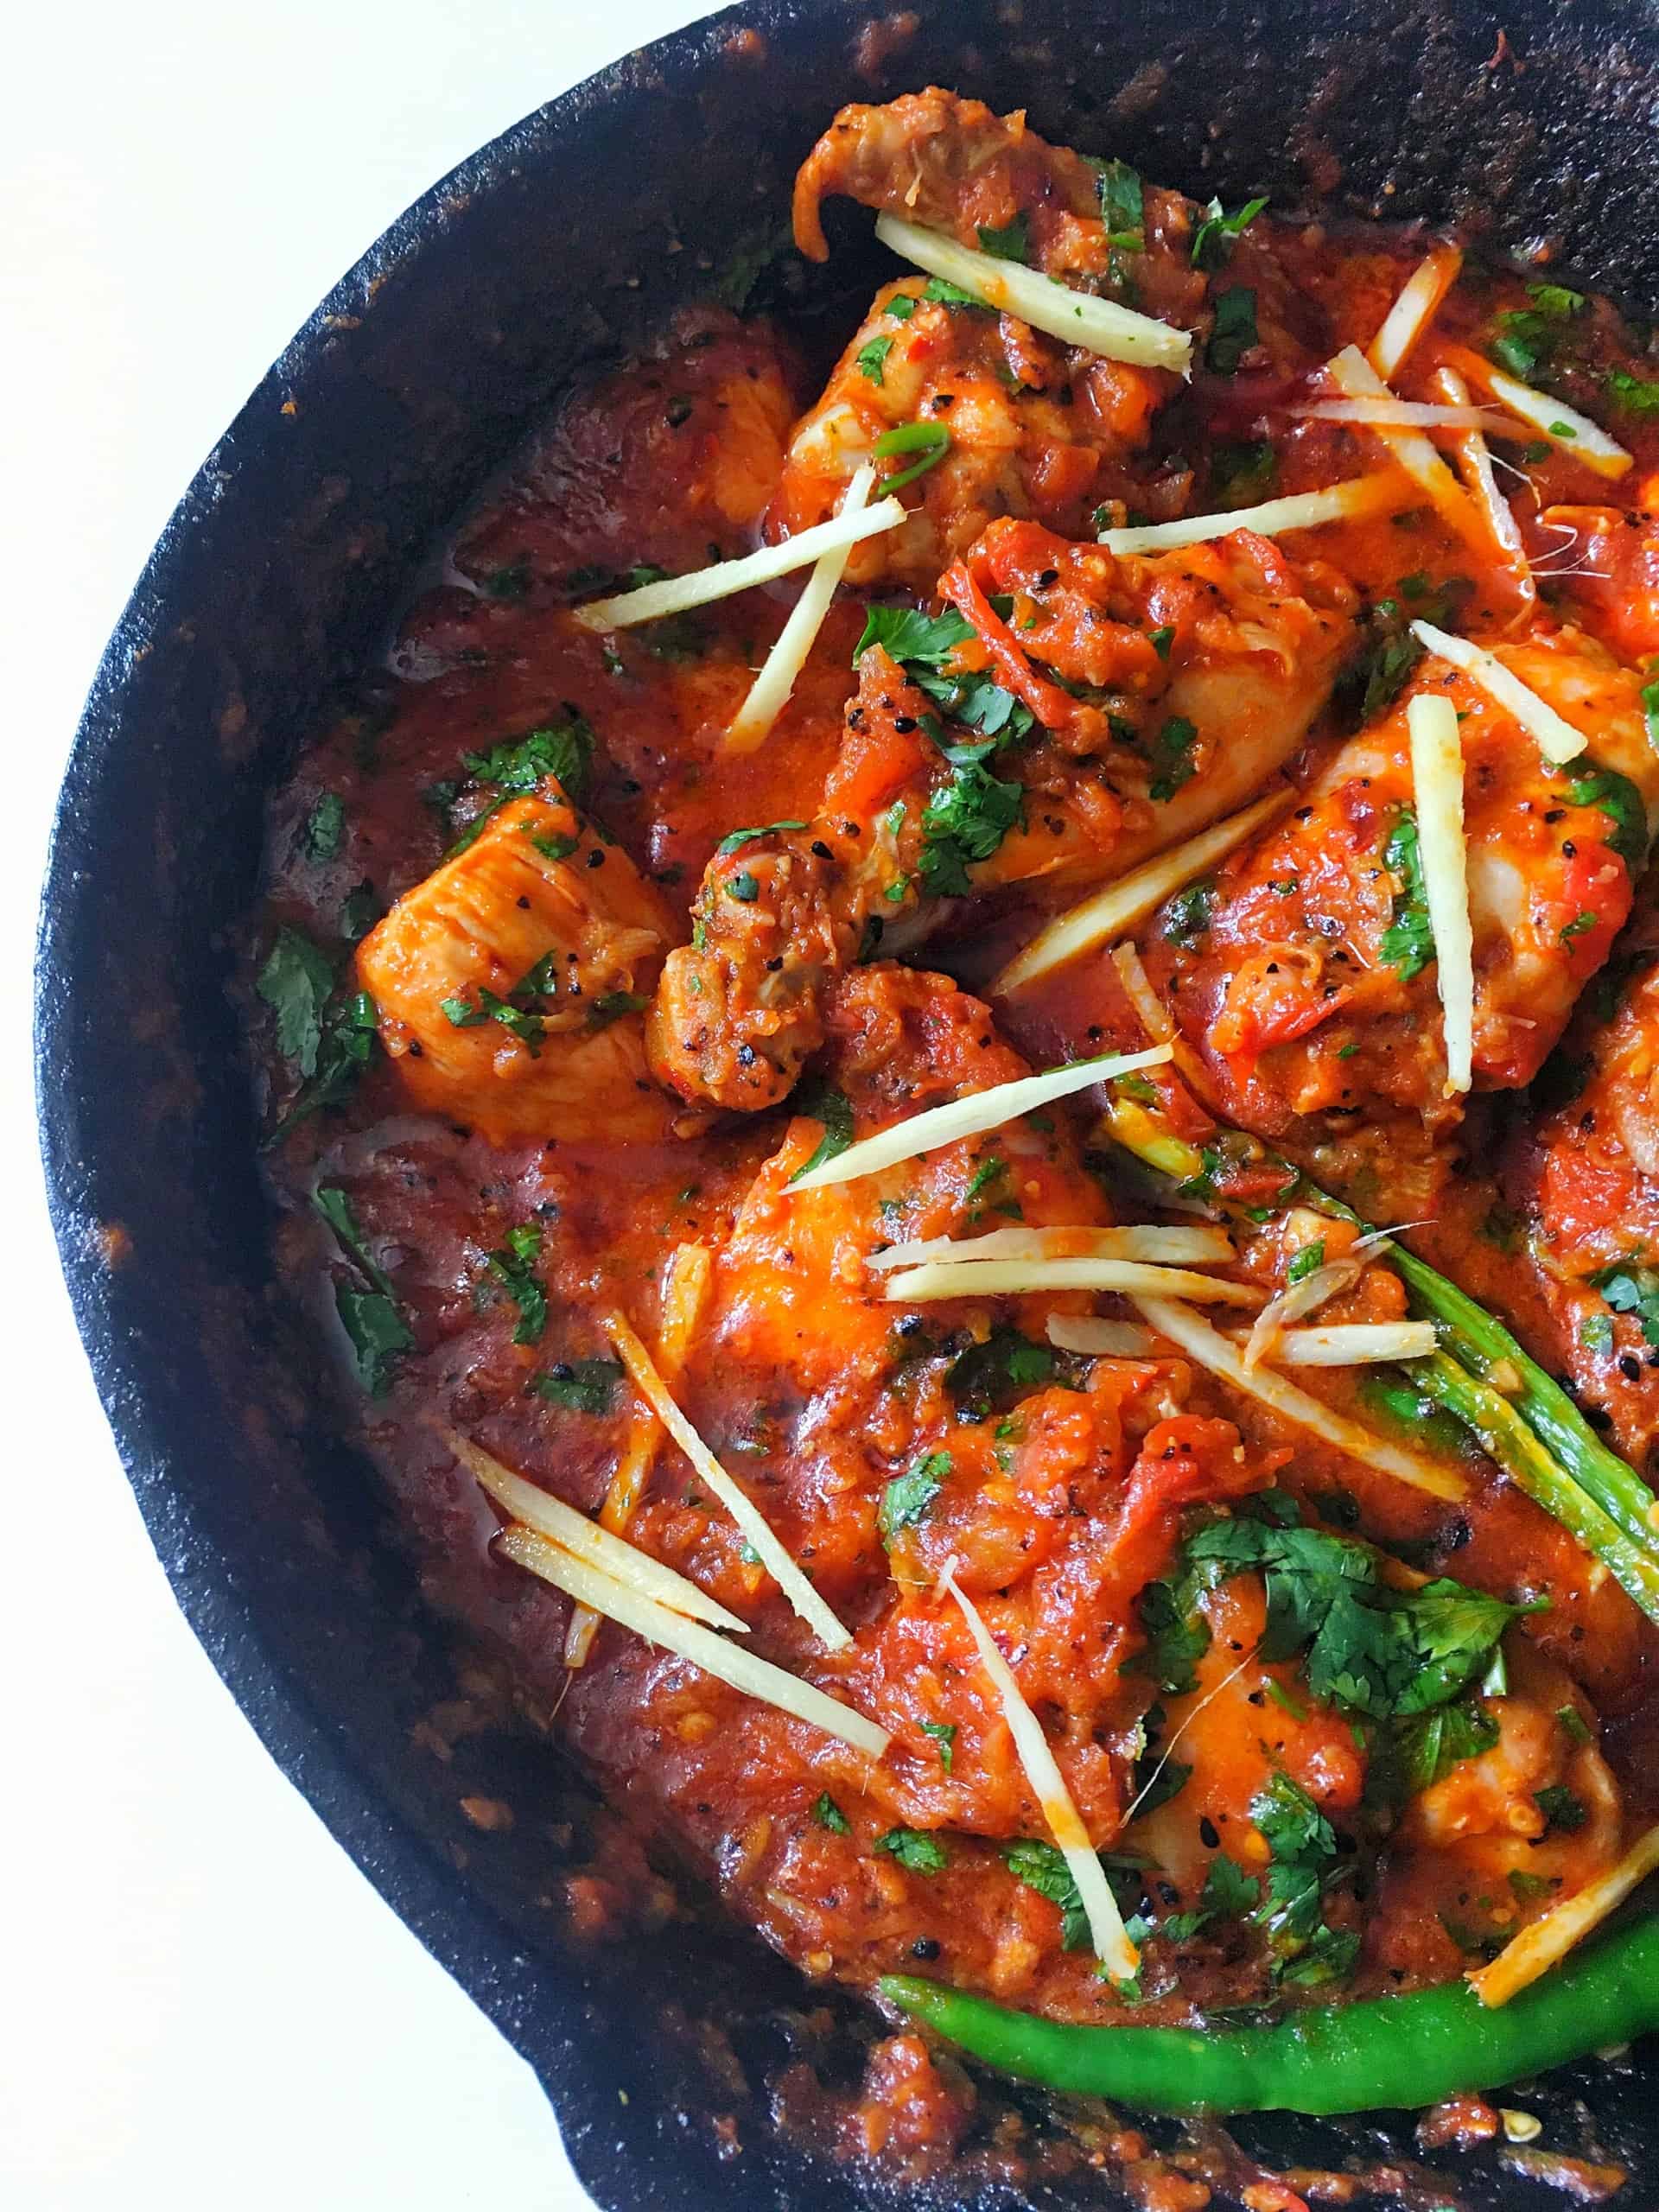 Chicken Karahi Recipe + Step by Step Pictures + Tips